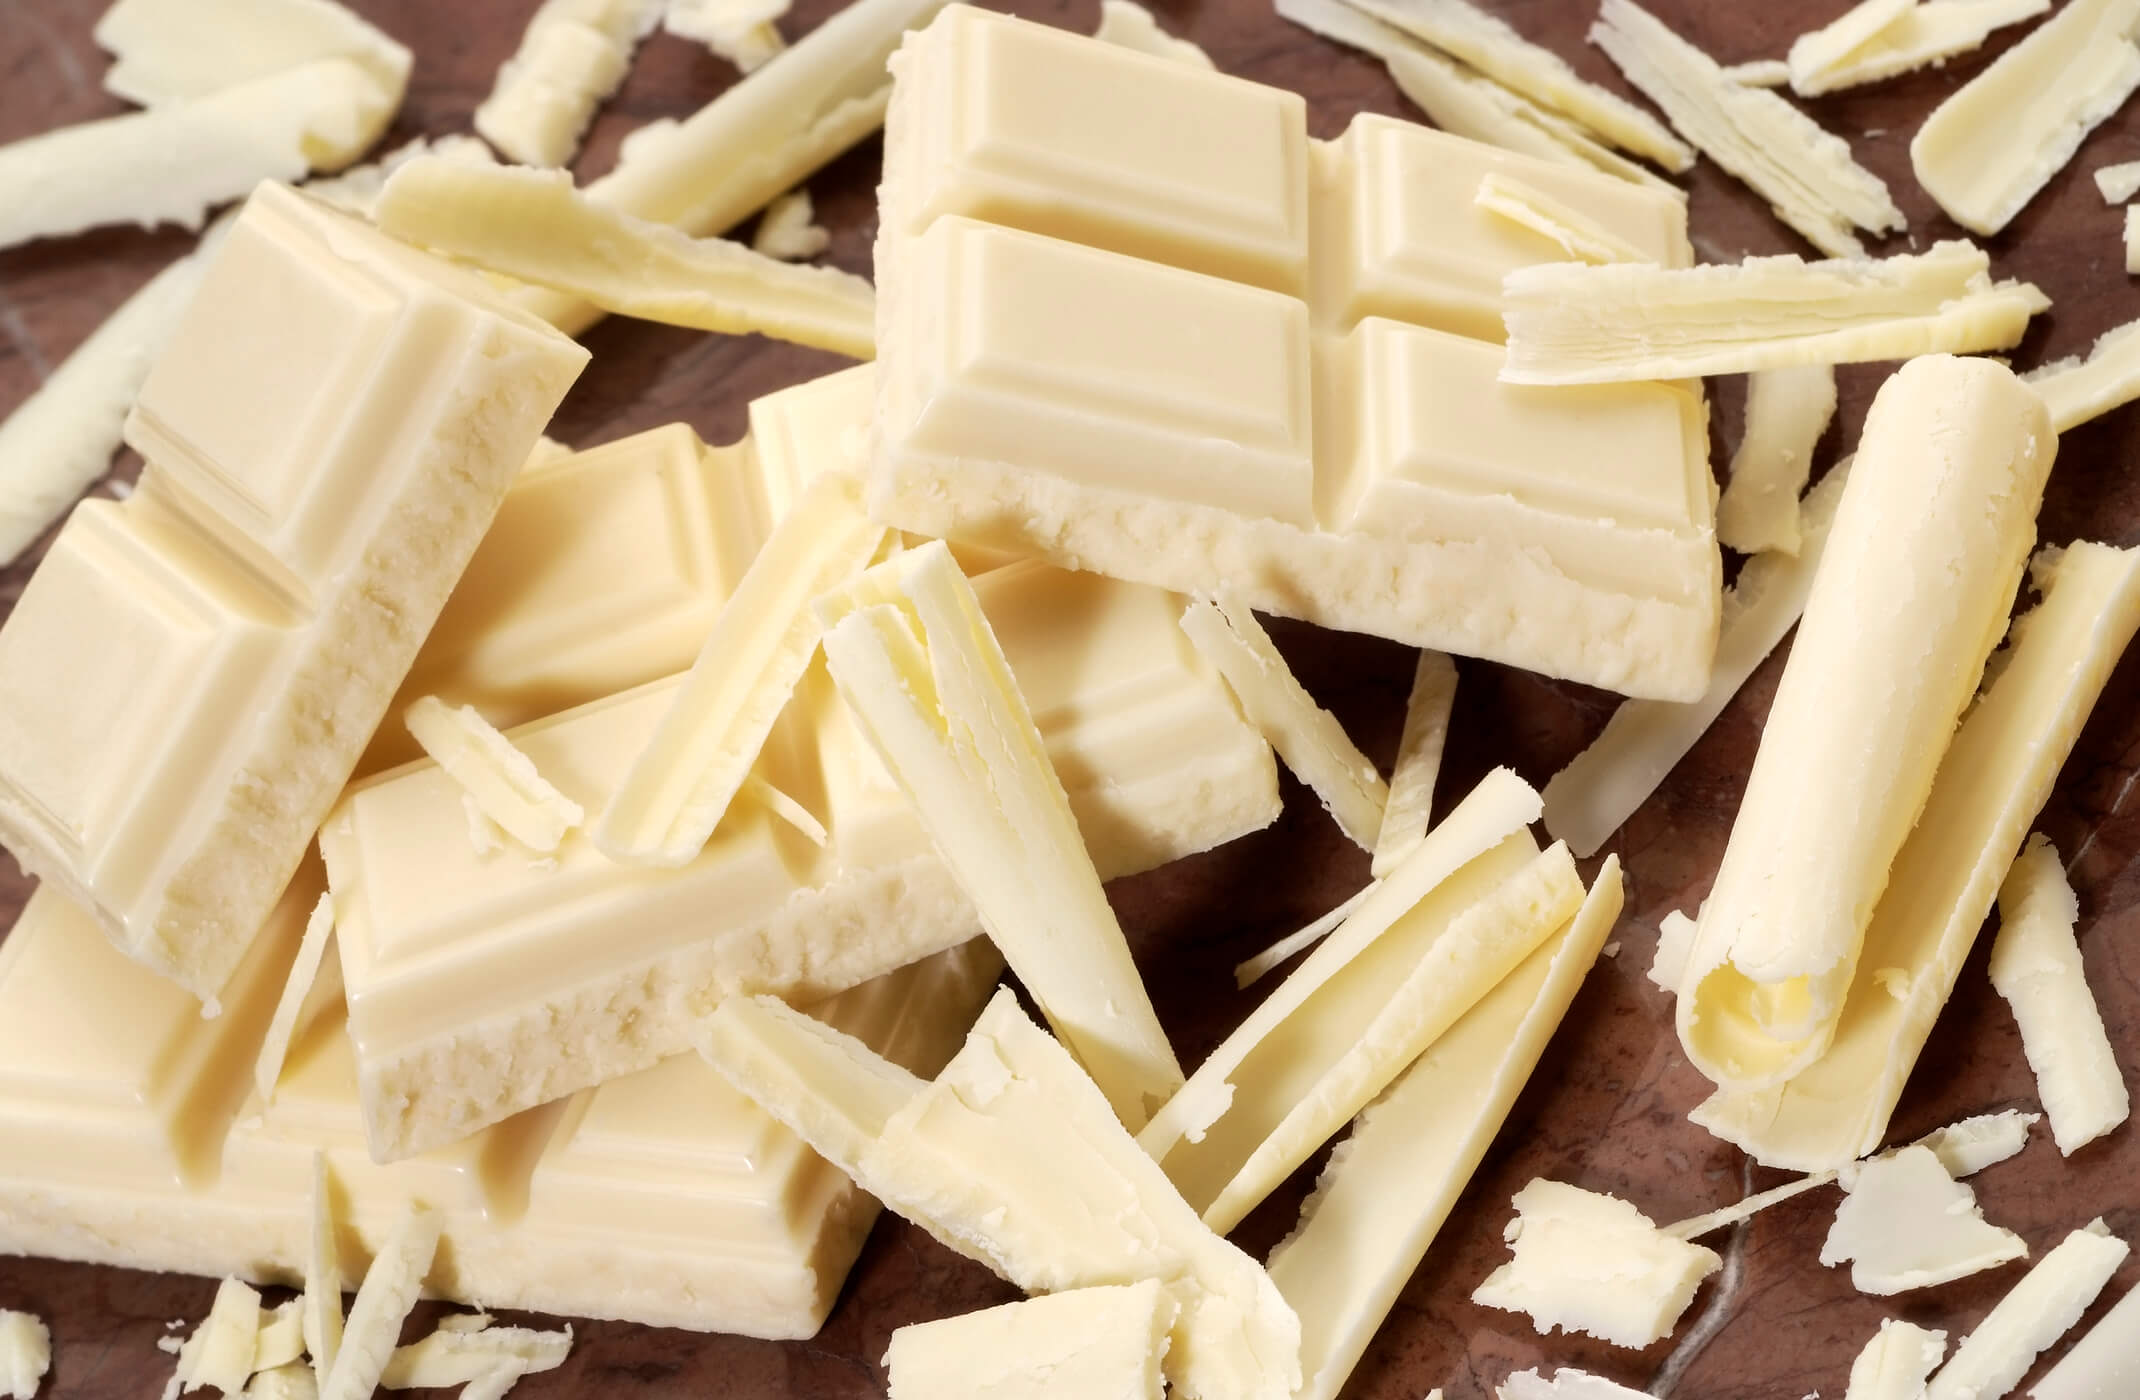 White chocolate. Is it real chocolate and what does it contain?